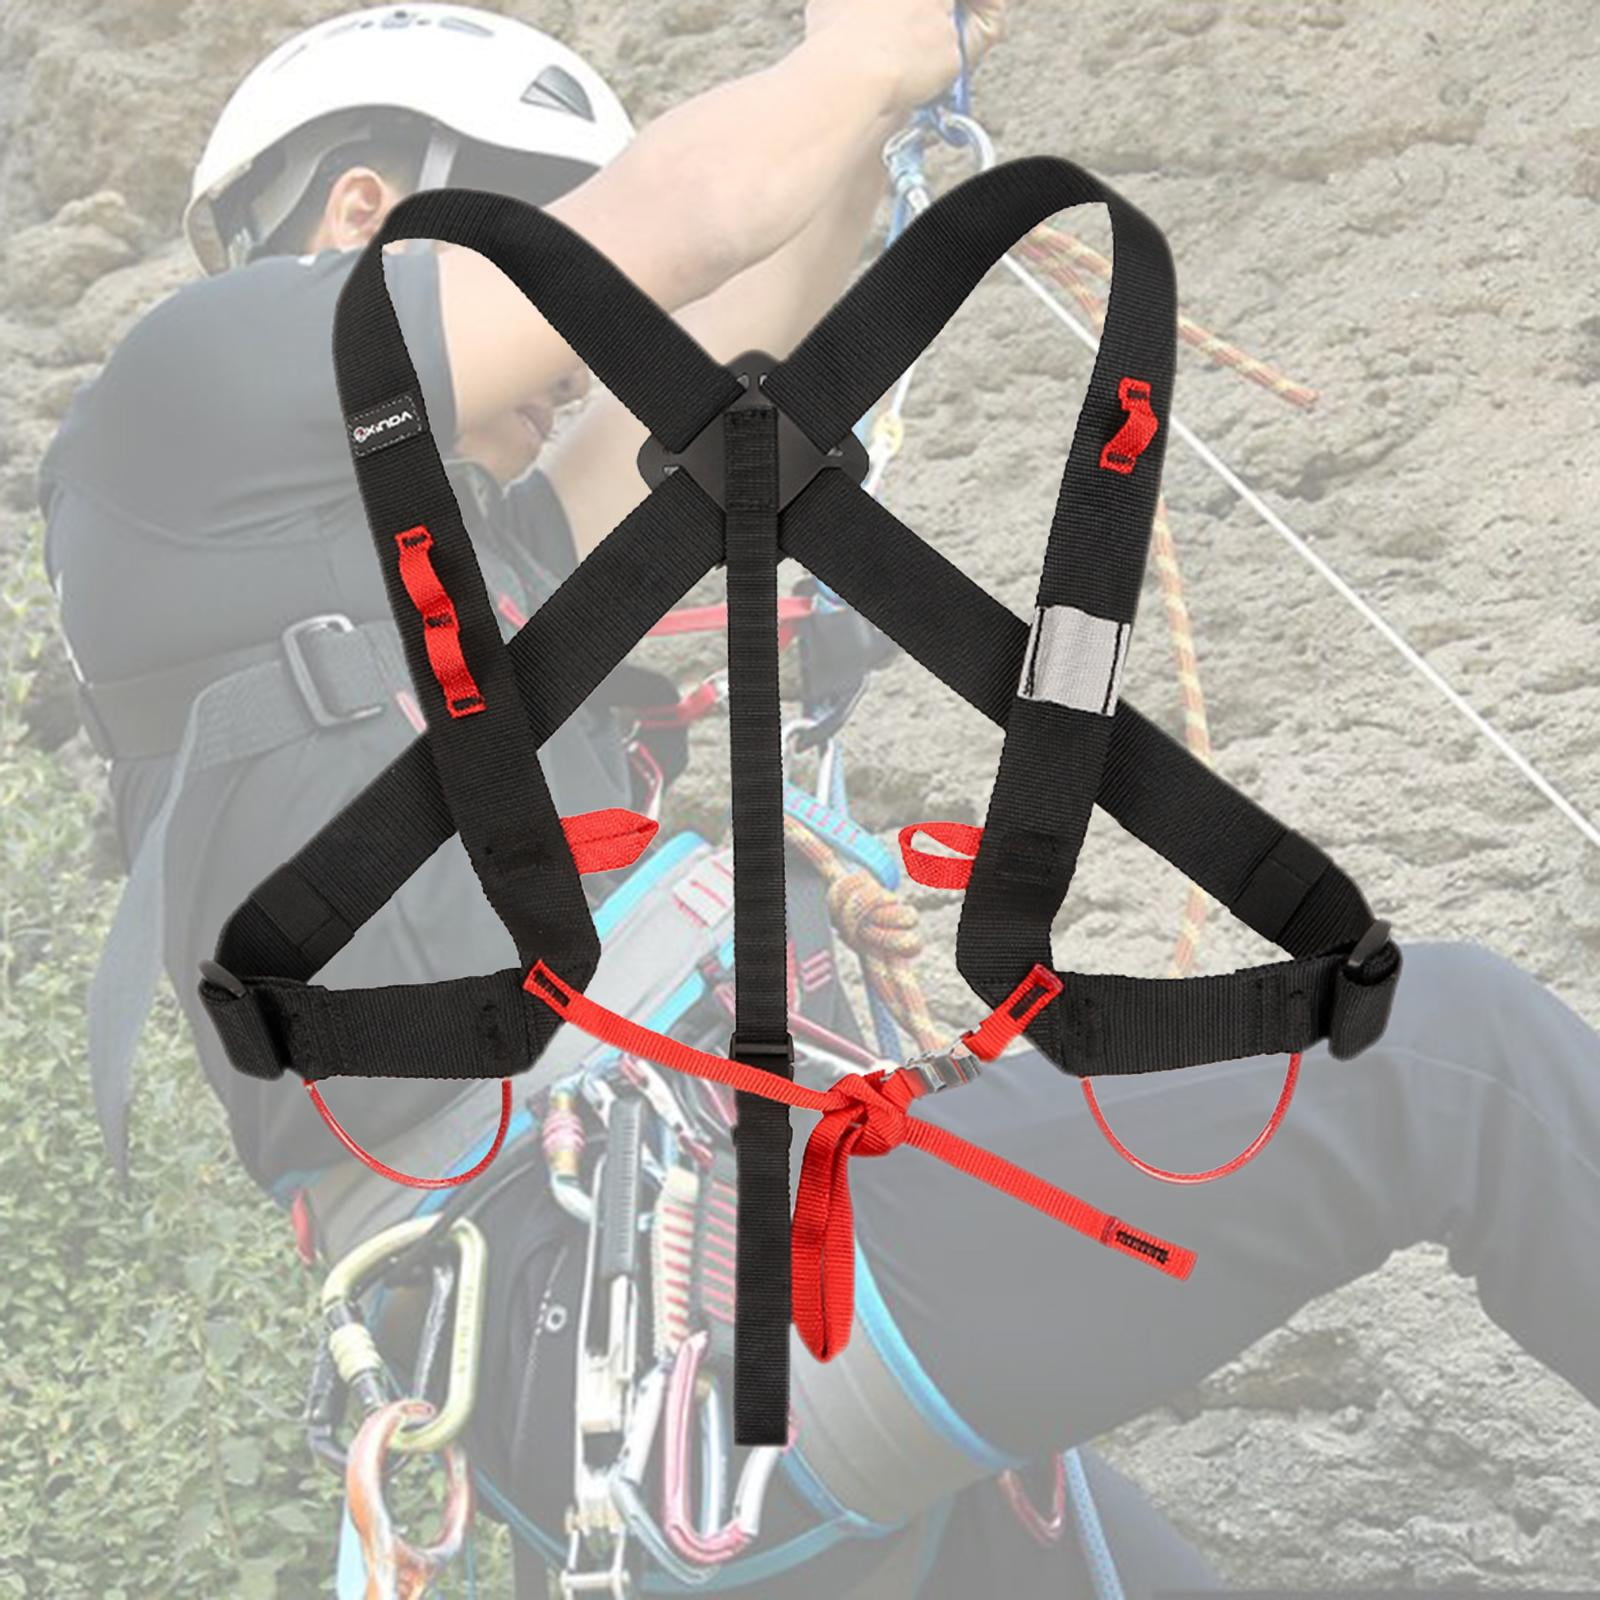 Safe Belts Guide Harness for Outward Band Expanding Training Caving Rock Climbing Rappelling Equip Safety Comfort¡­ Climbing Harness Full Body and Half Body Harness 